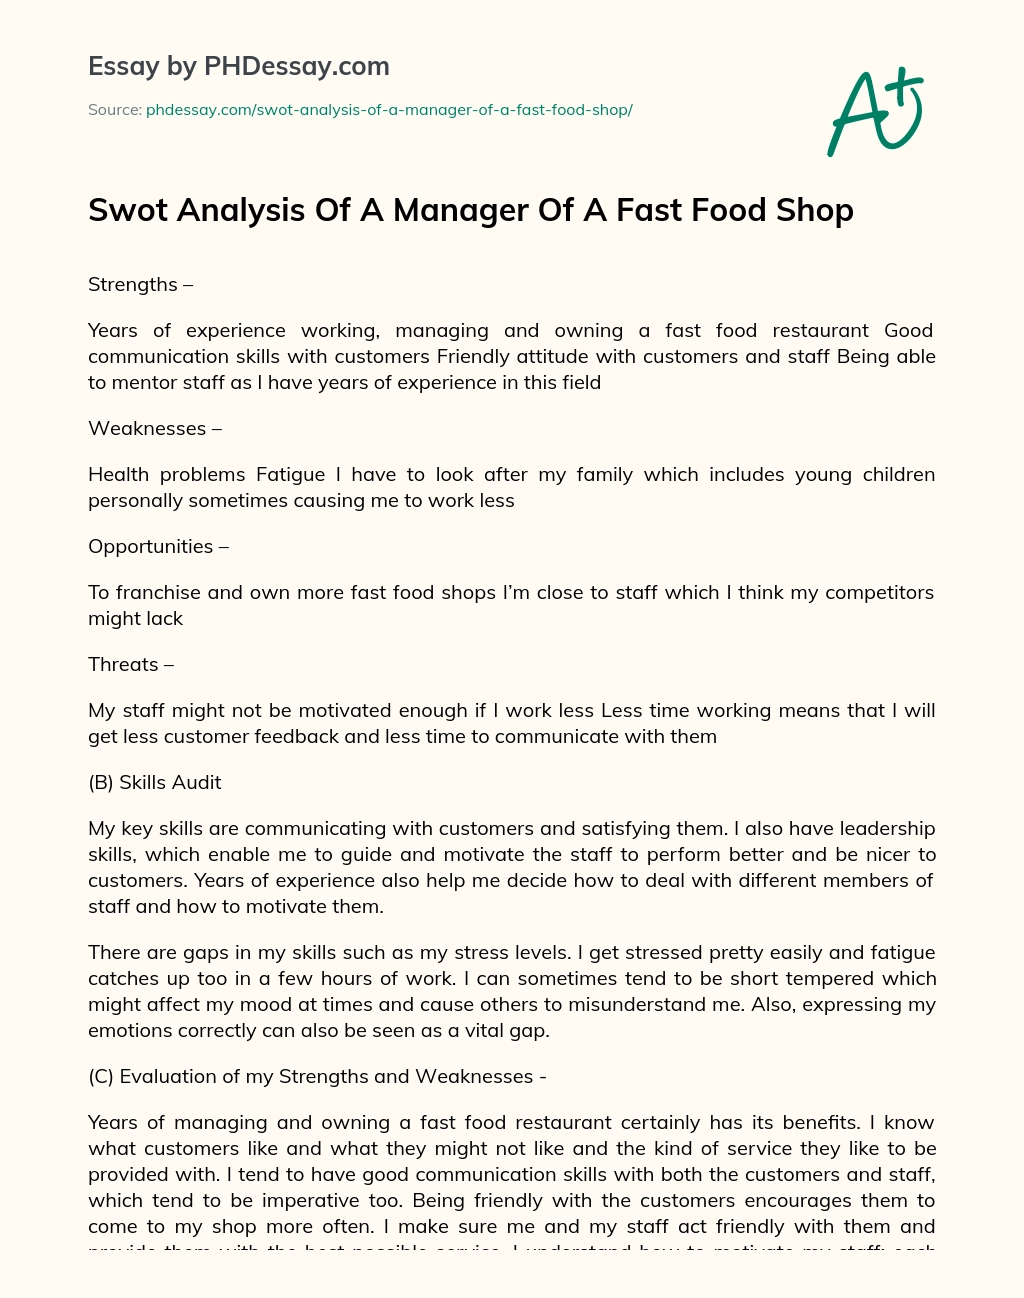 Swot Analysis Of A Manager Of A Fast Food Shop essay